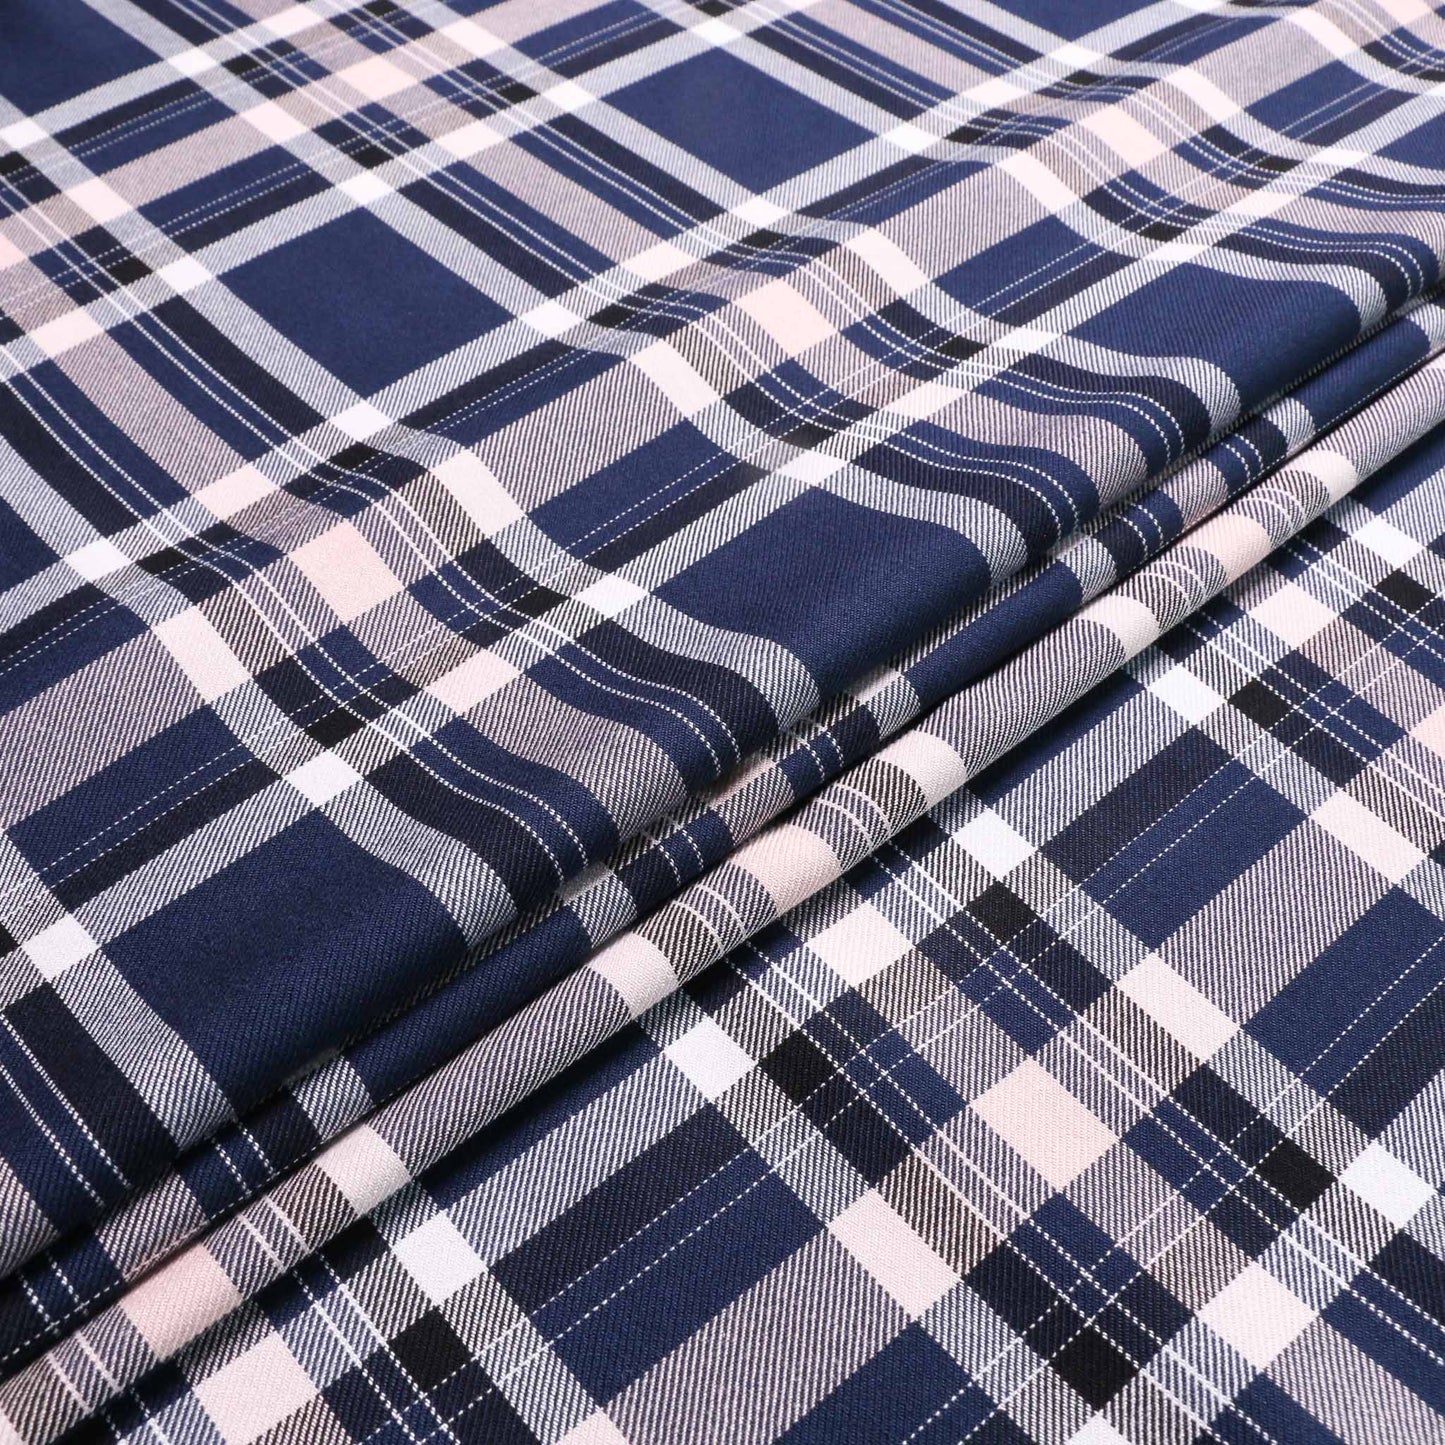 navy blue viscose twill dressmaking rayon fabric with large white pink check design